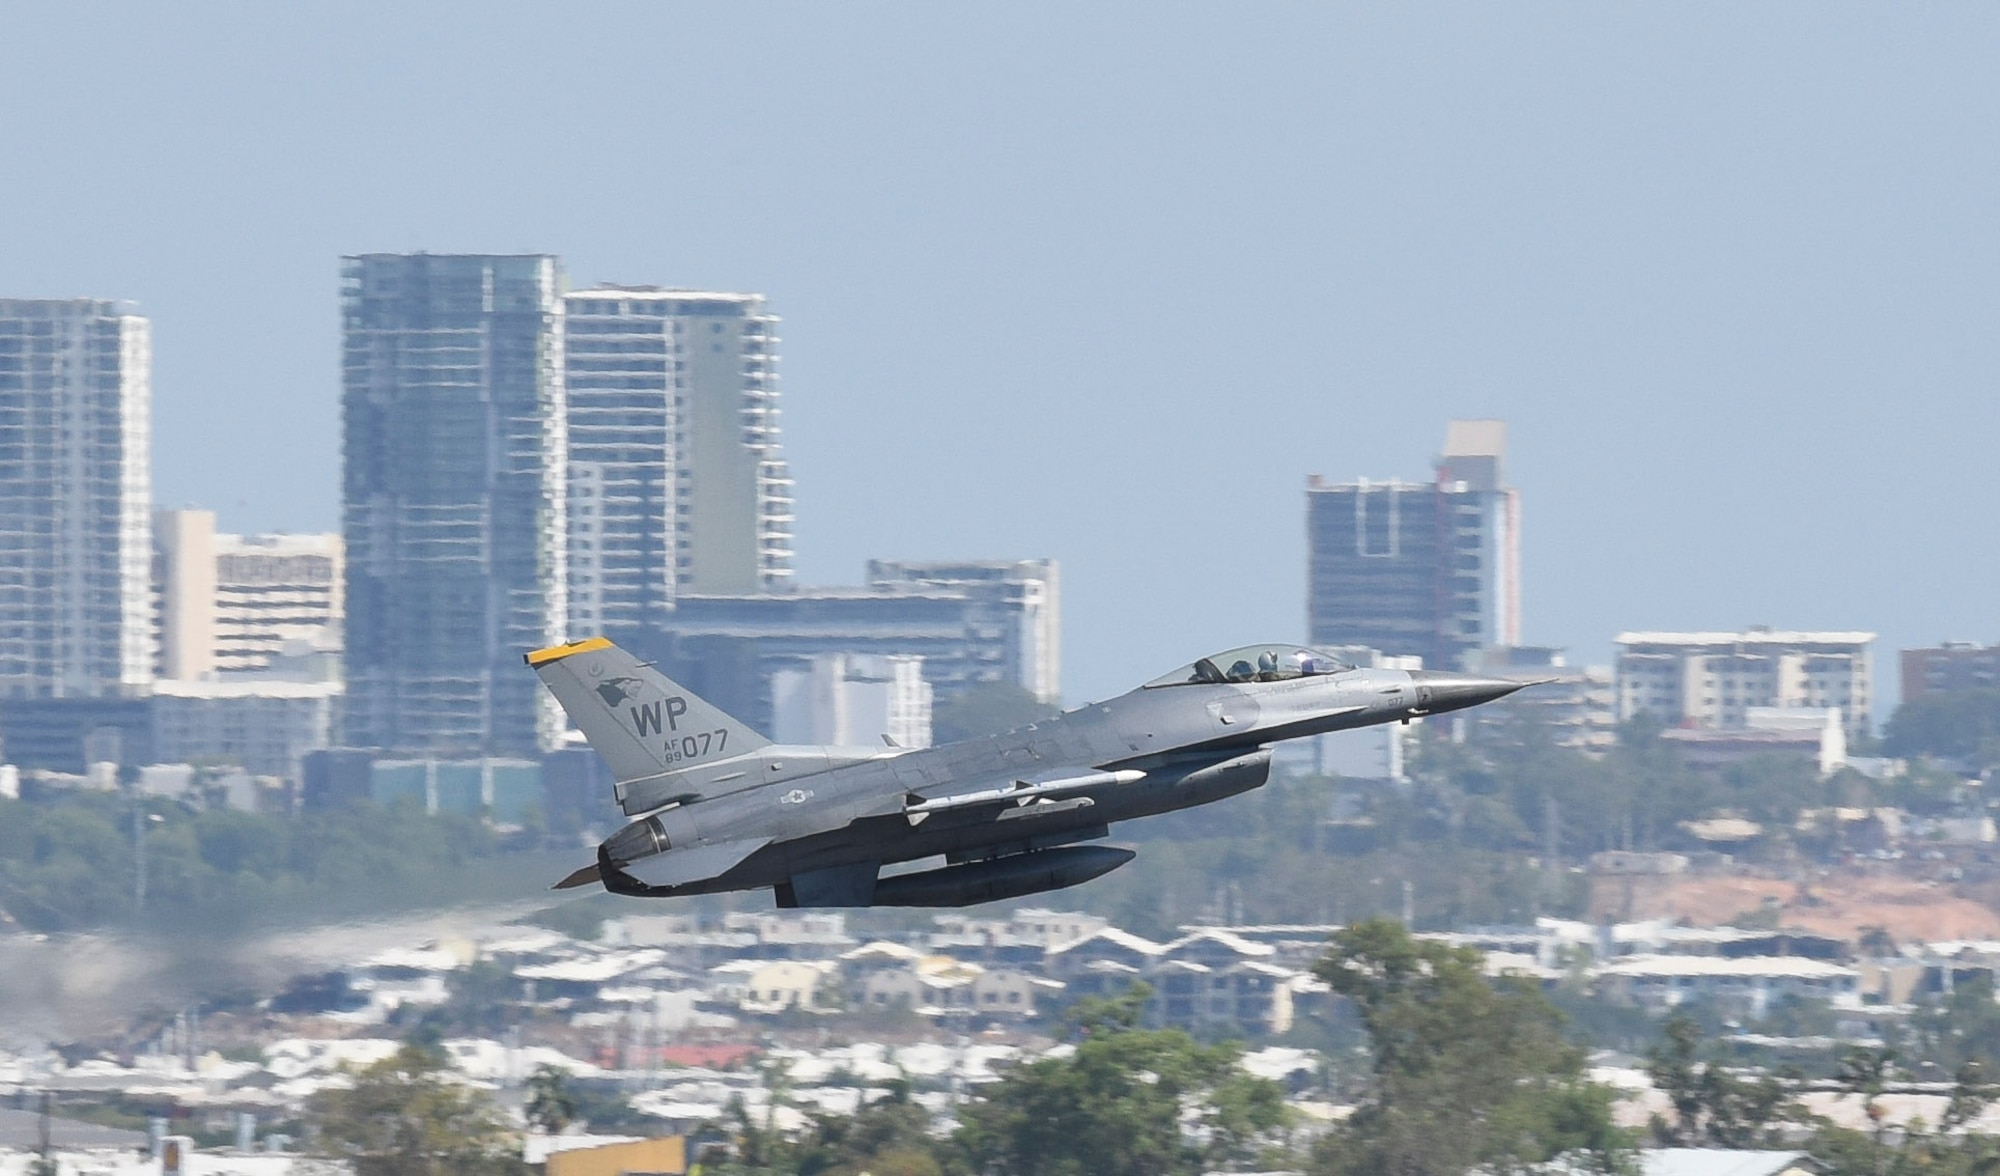 A U.S. Air Force F-16 Fighting Falcon, assigned to Kunsan Air Base, Republic of Korea, launches from the runway on Royal Australian Air Force Base Darwin, Australia during exercise Pitch Black 2018, Aug. 2, 2018. PBK18 allows regional partners and participating nations to exercise deployed units in the tasking, planning, and execution of offensive counter-air and offensive air support, such as basic fighting maneuvers, air combat maneuvers, and close air support. (U.S. Air Force photo by Senior Airman Savannah L. Waters)